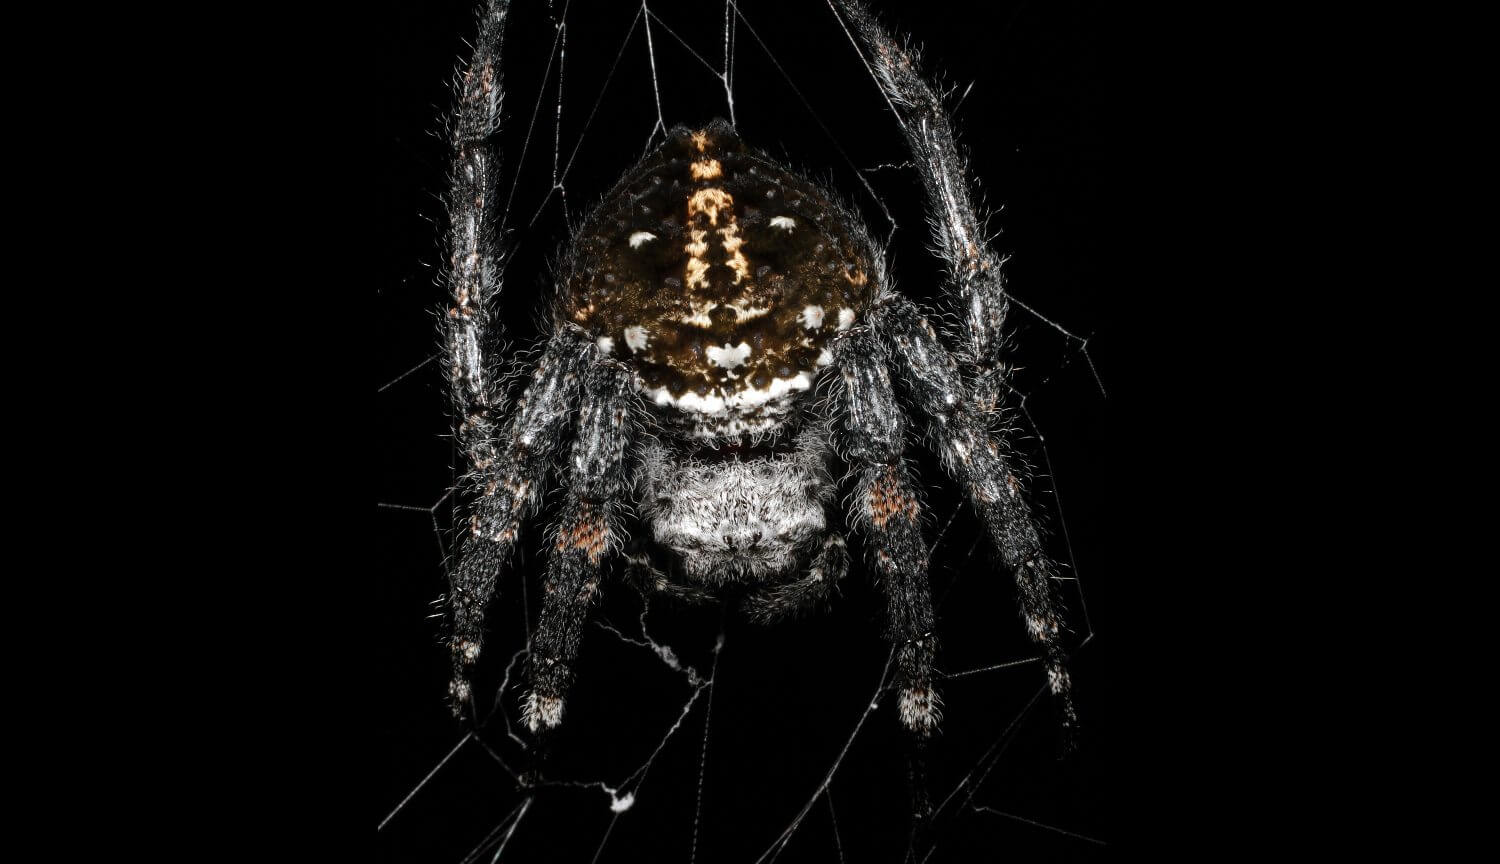 This spider weaves the strongest web. What's his secret?